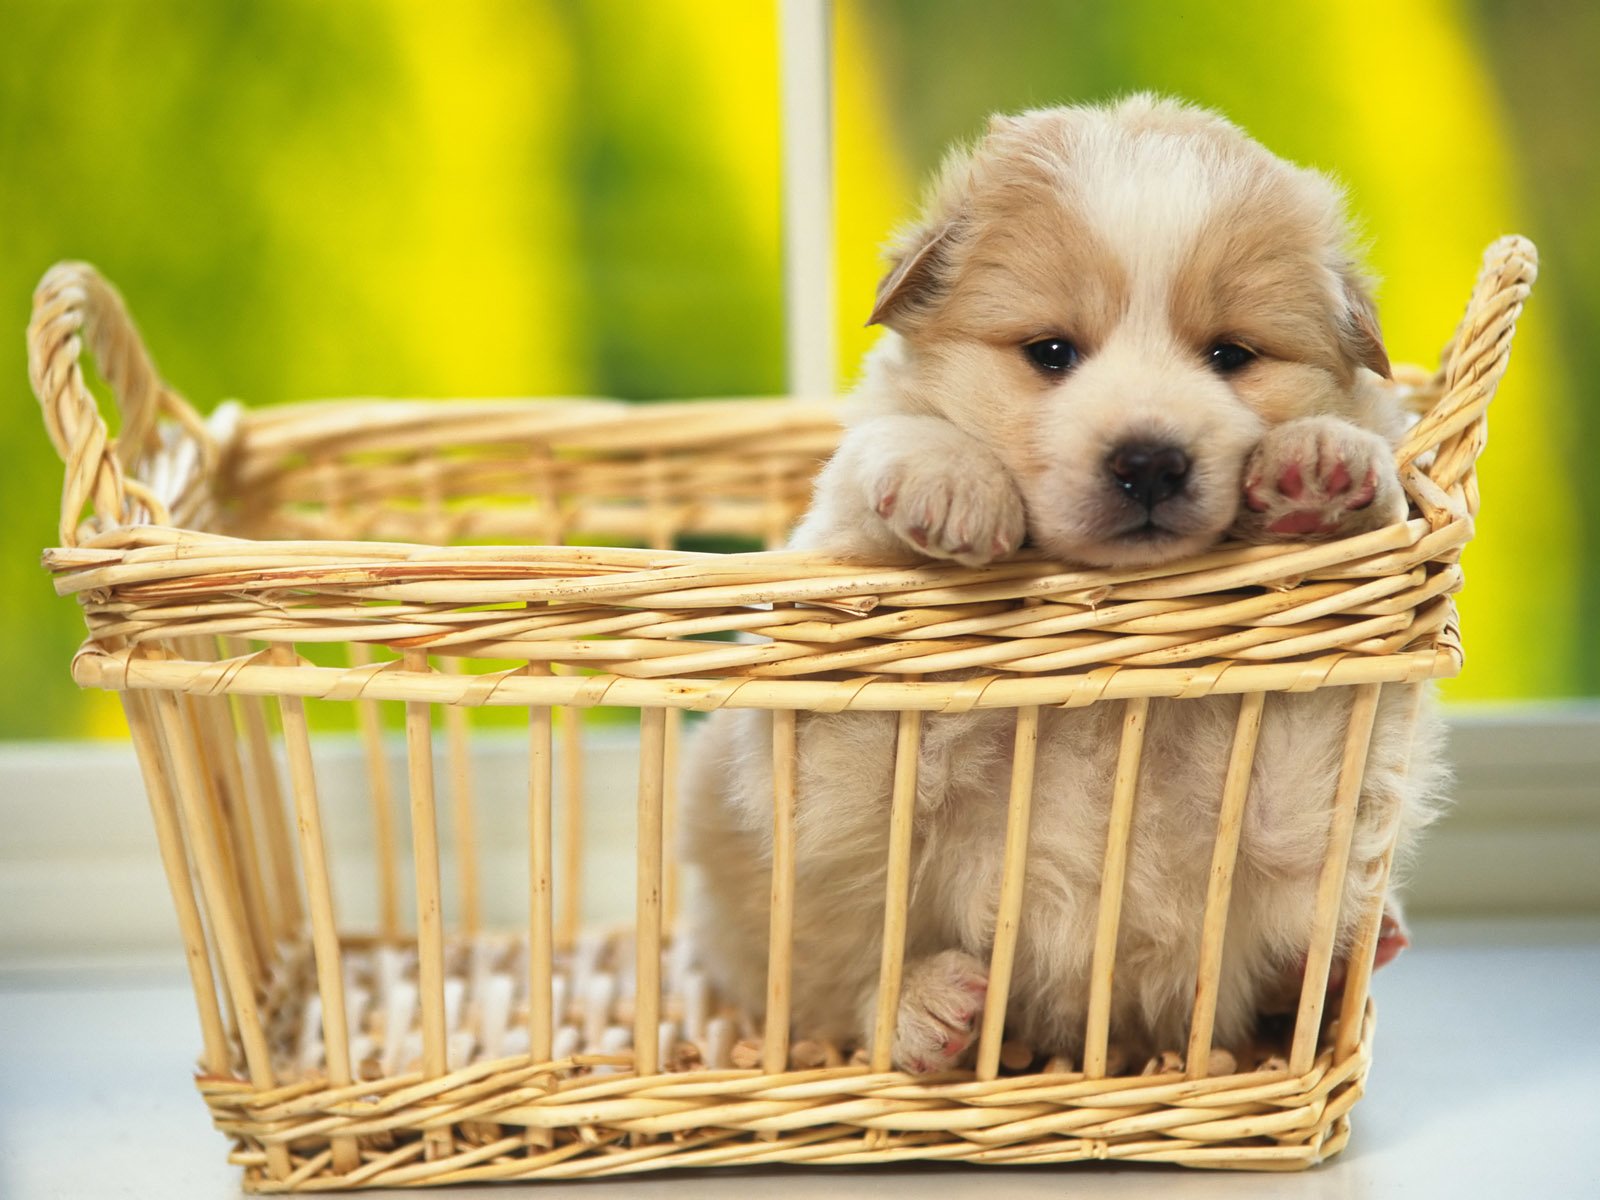 Cute Puppy In A Basket Image - Id: 280656 - Image Abyss